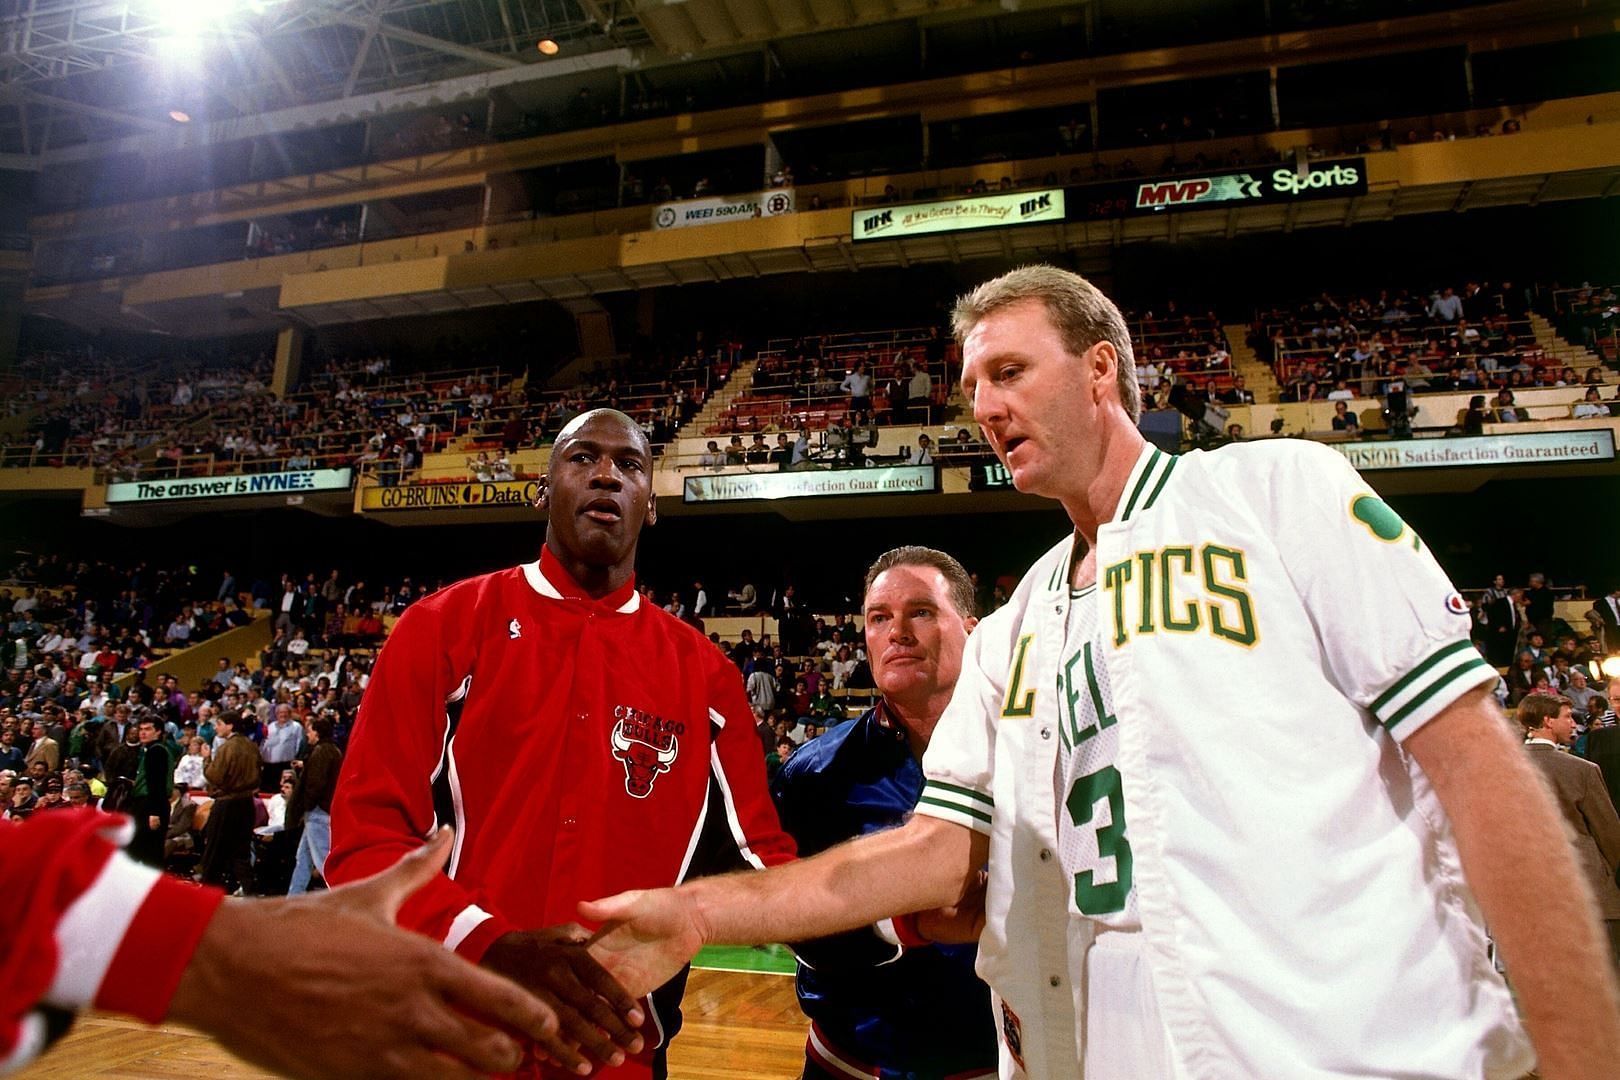 Michael Jordan and Larry Bird were two of the most competitive players in NBA History